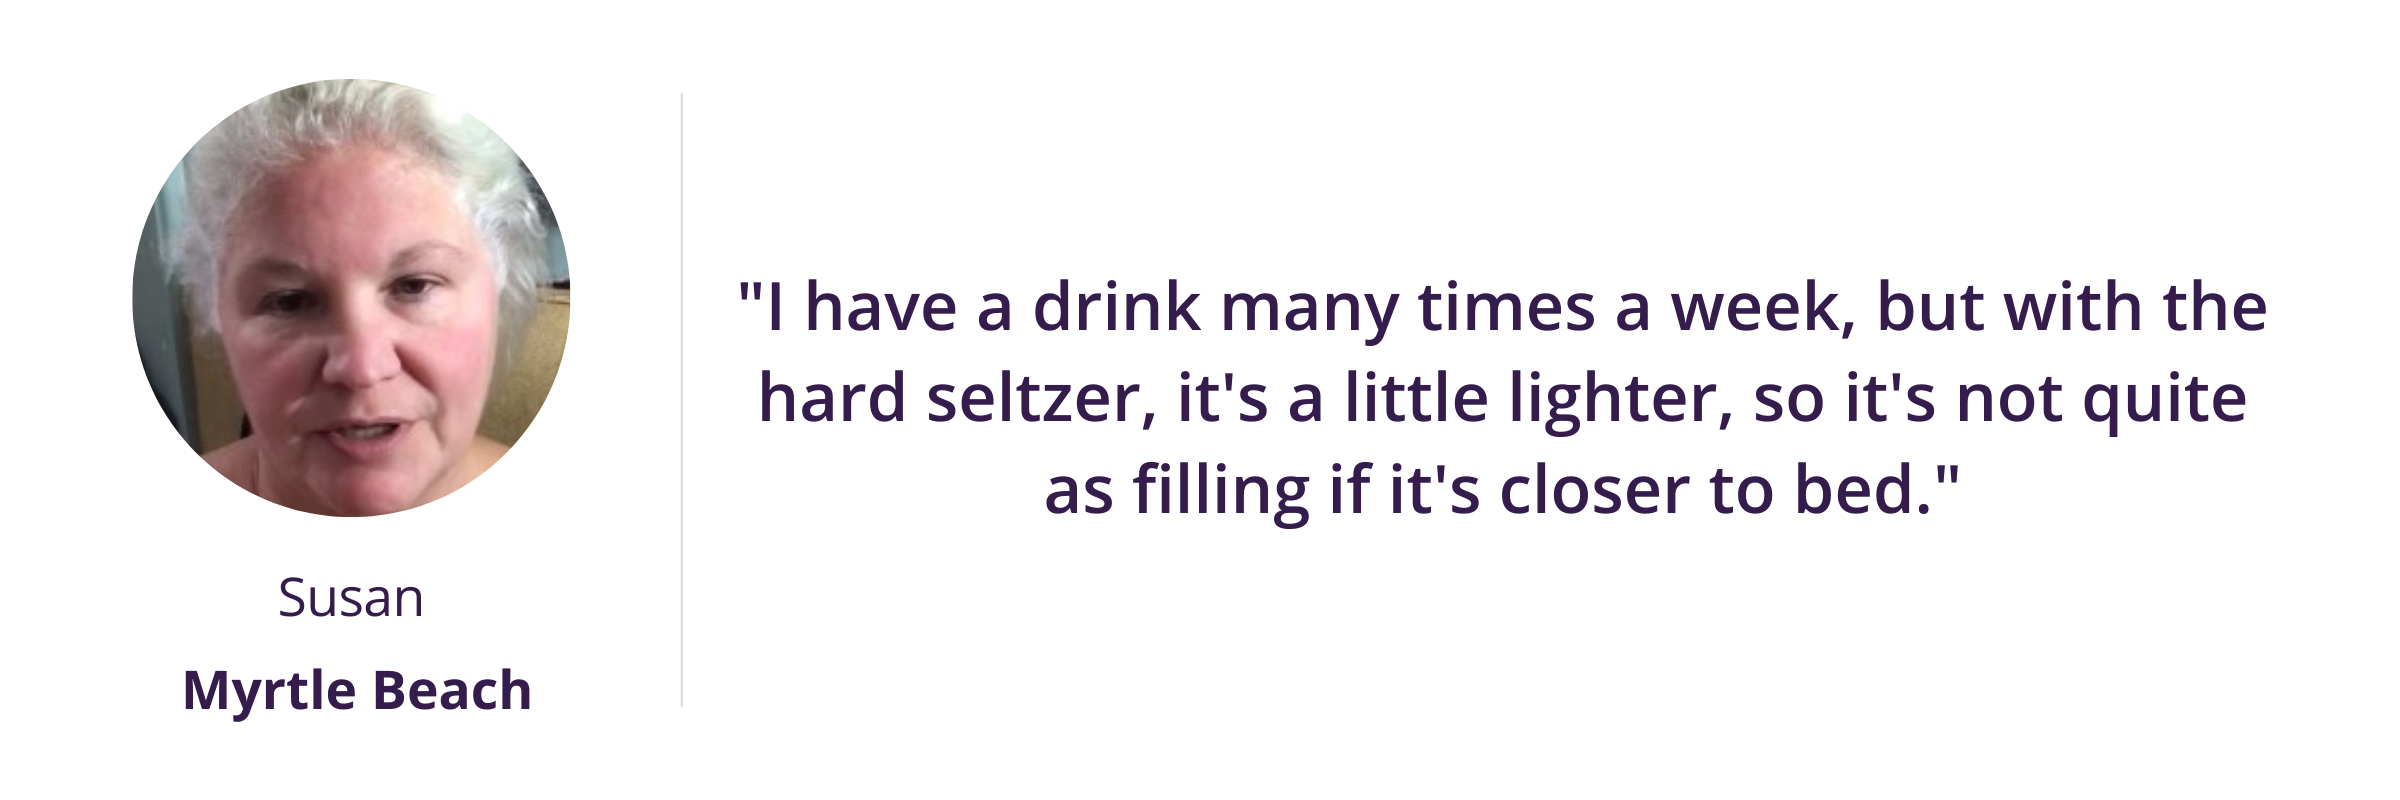 I have a drink many times a week, but with the hard seltzer, it's a little lighter, so it's not quite as filling if it's closer to bed.